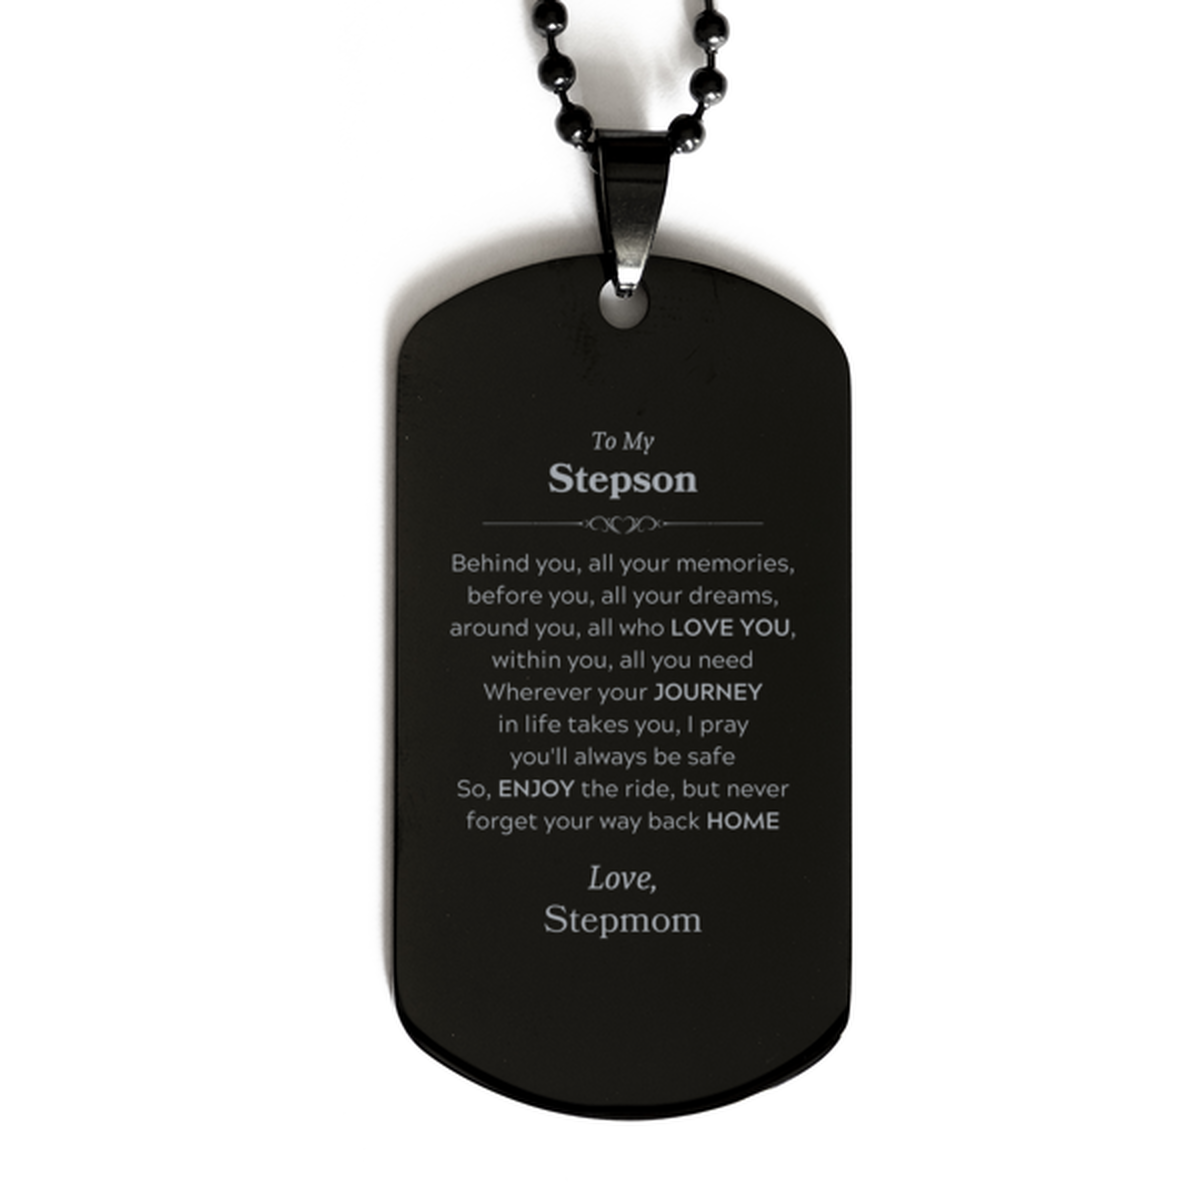 To My Stepson Graduation Gifts from Stepmom, Stepson Black Dog Tag Christmas Birthday Gifts for Stepson Behind you, all your memories, before you, all your dreams. Love, Stepmom